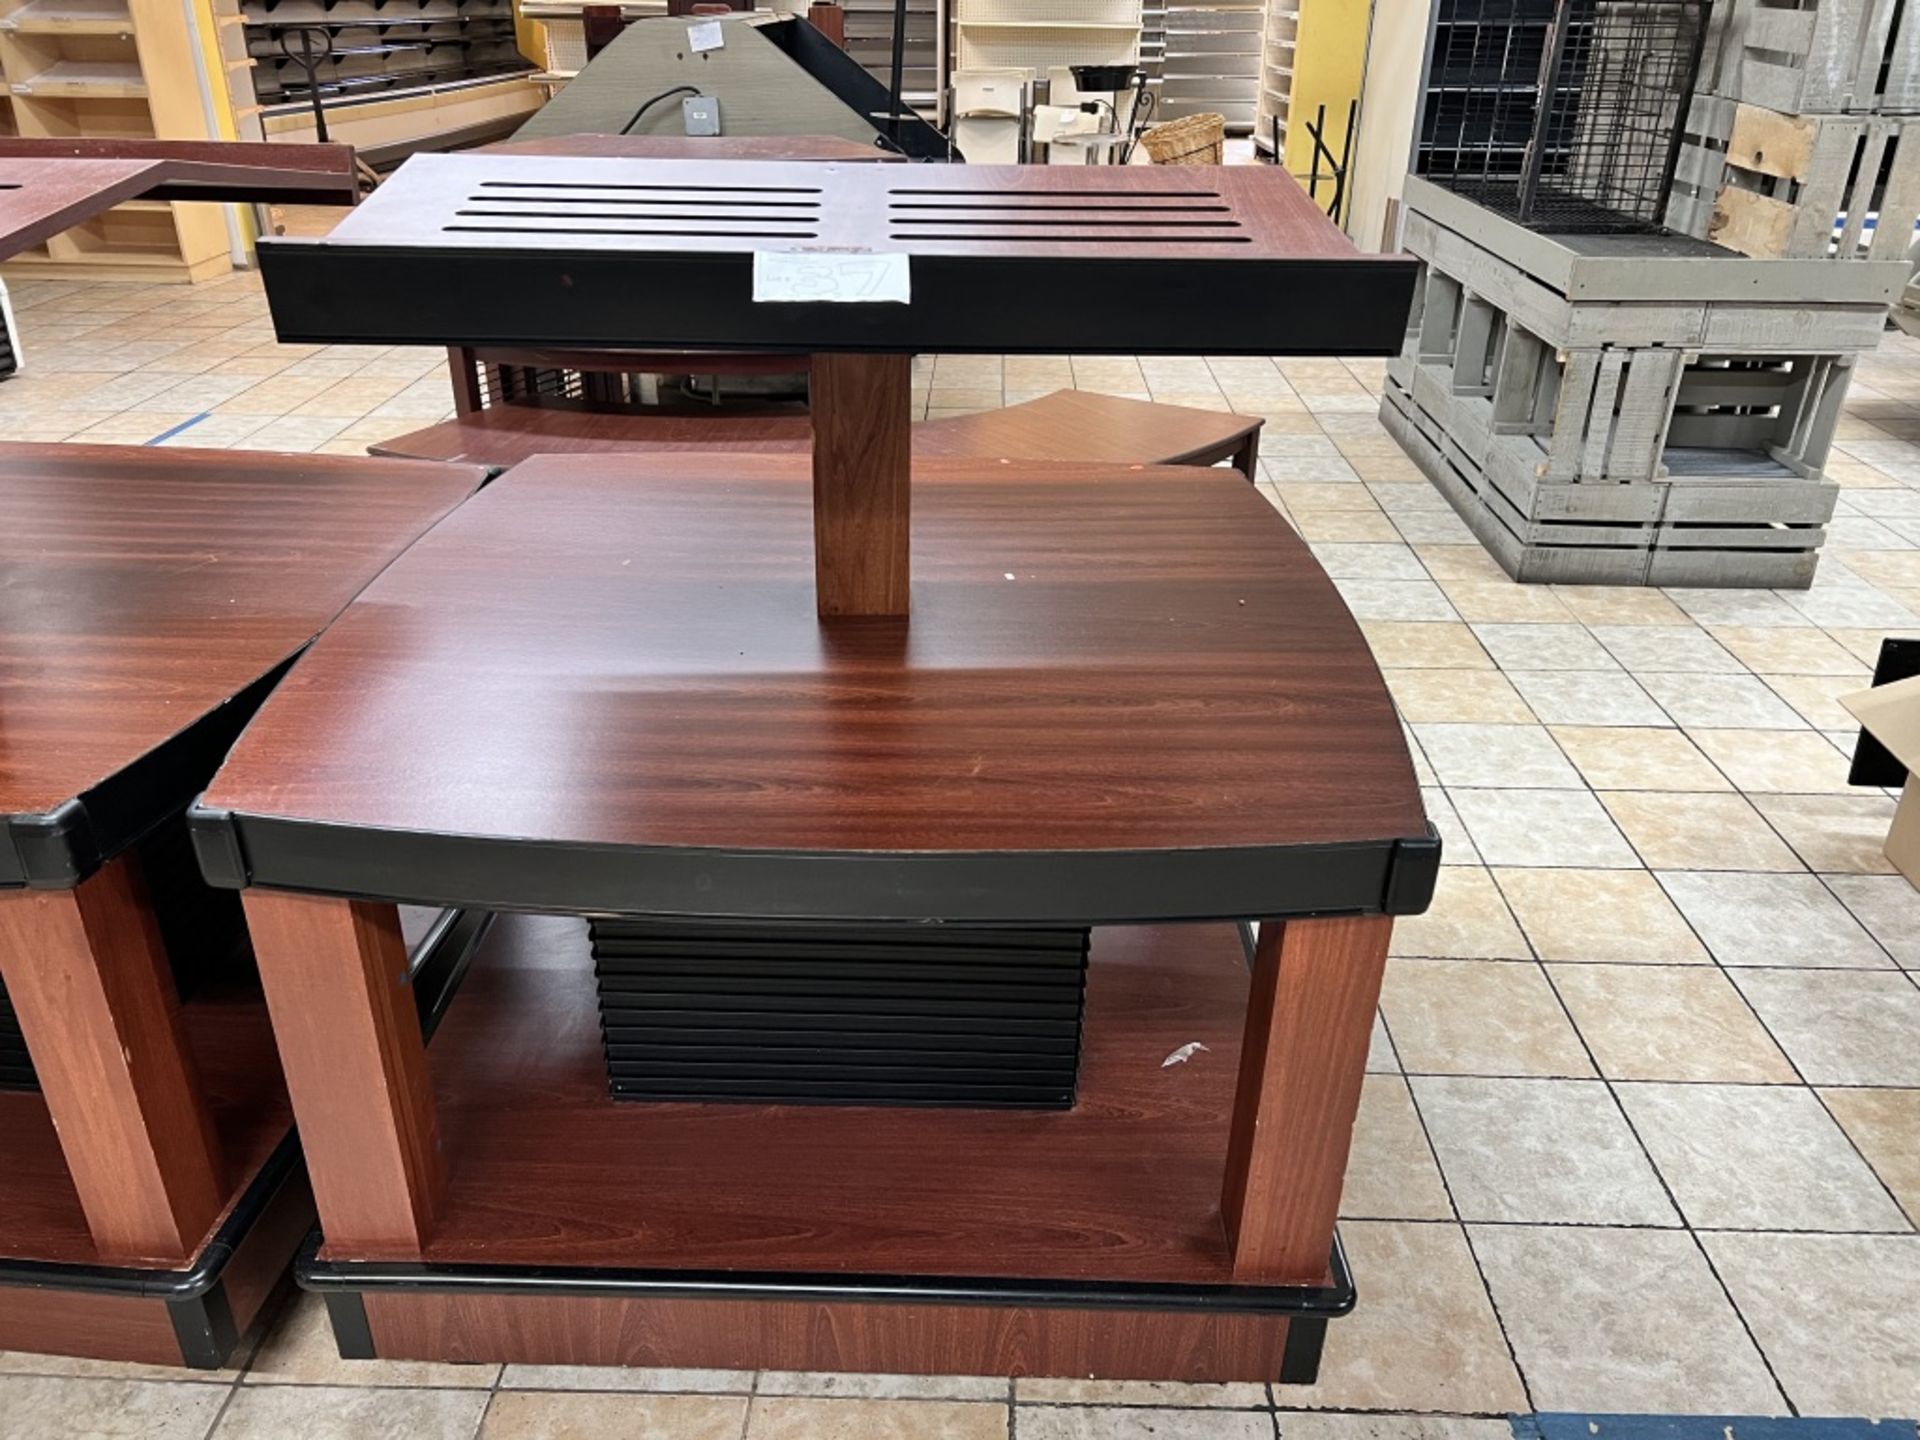 Lot of: (2) approximately 47” X 47” 2 tier wood laminate display tables w/ upper display shelving